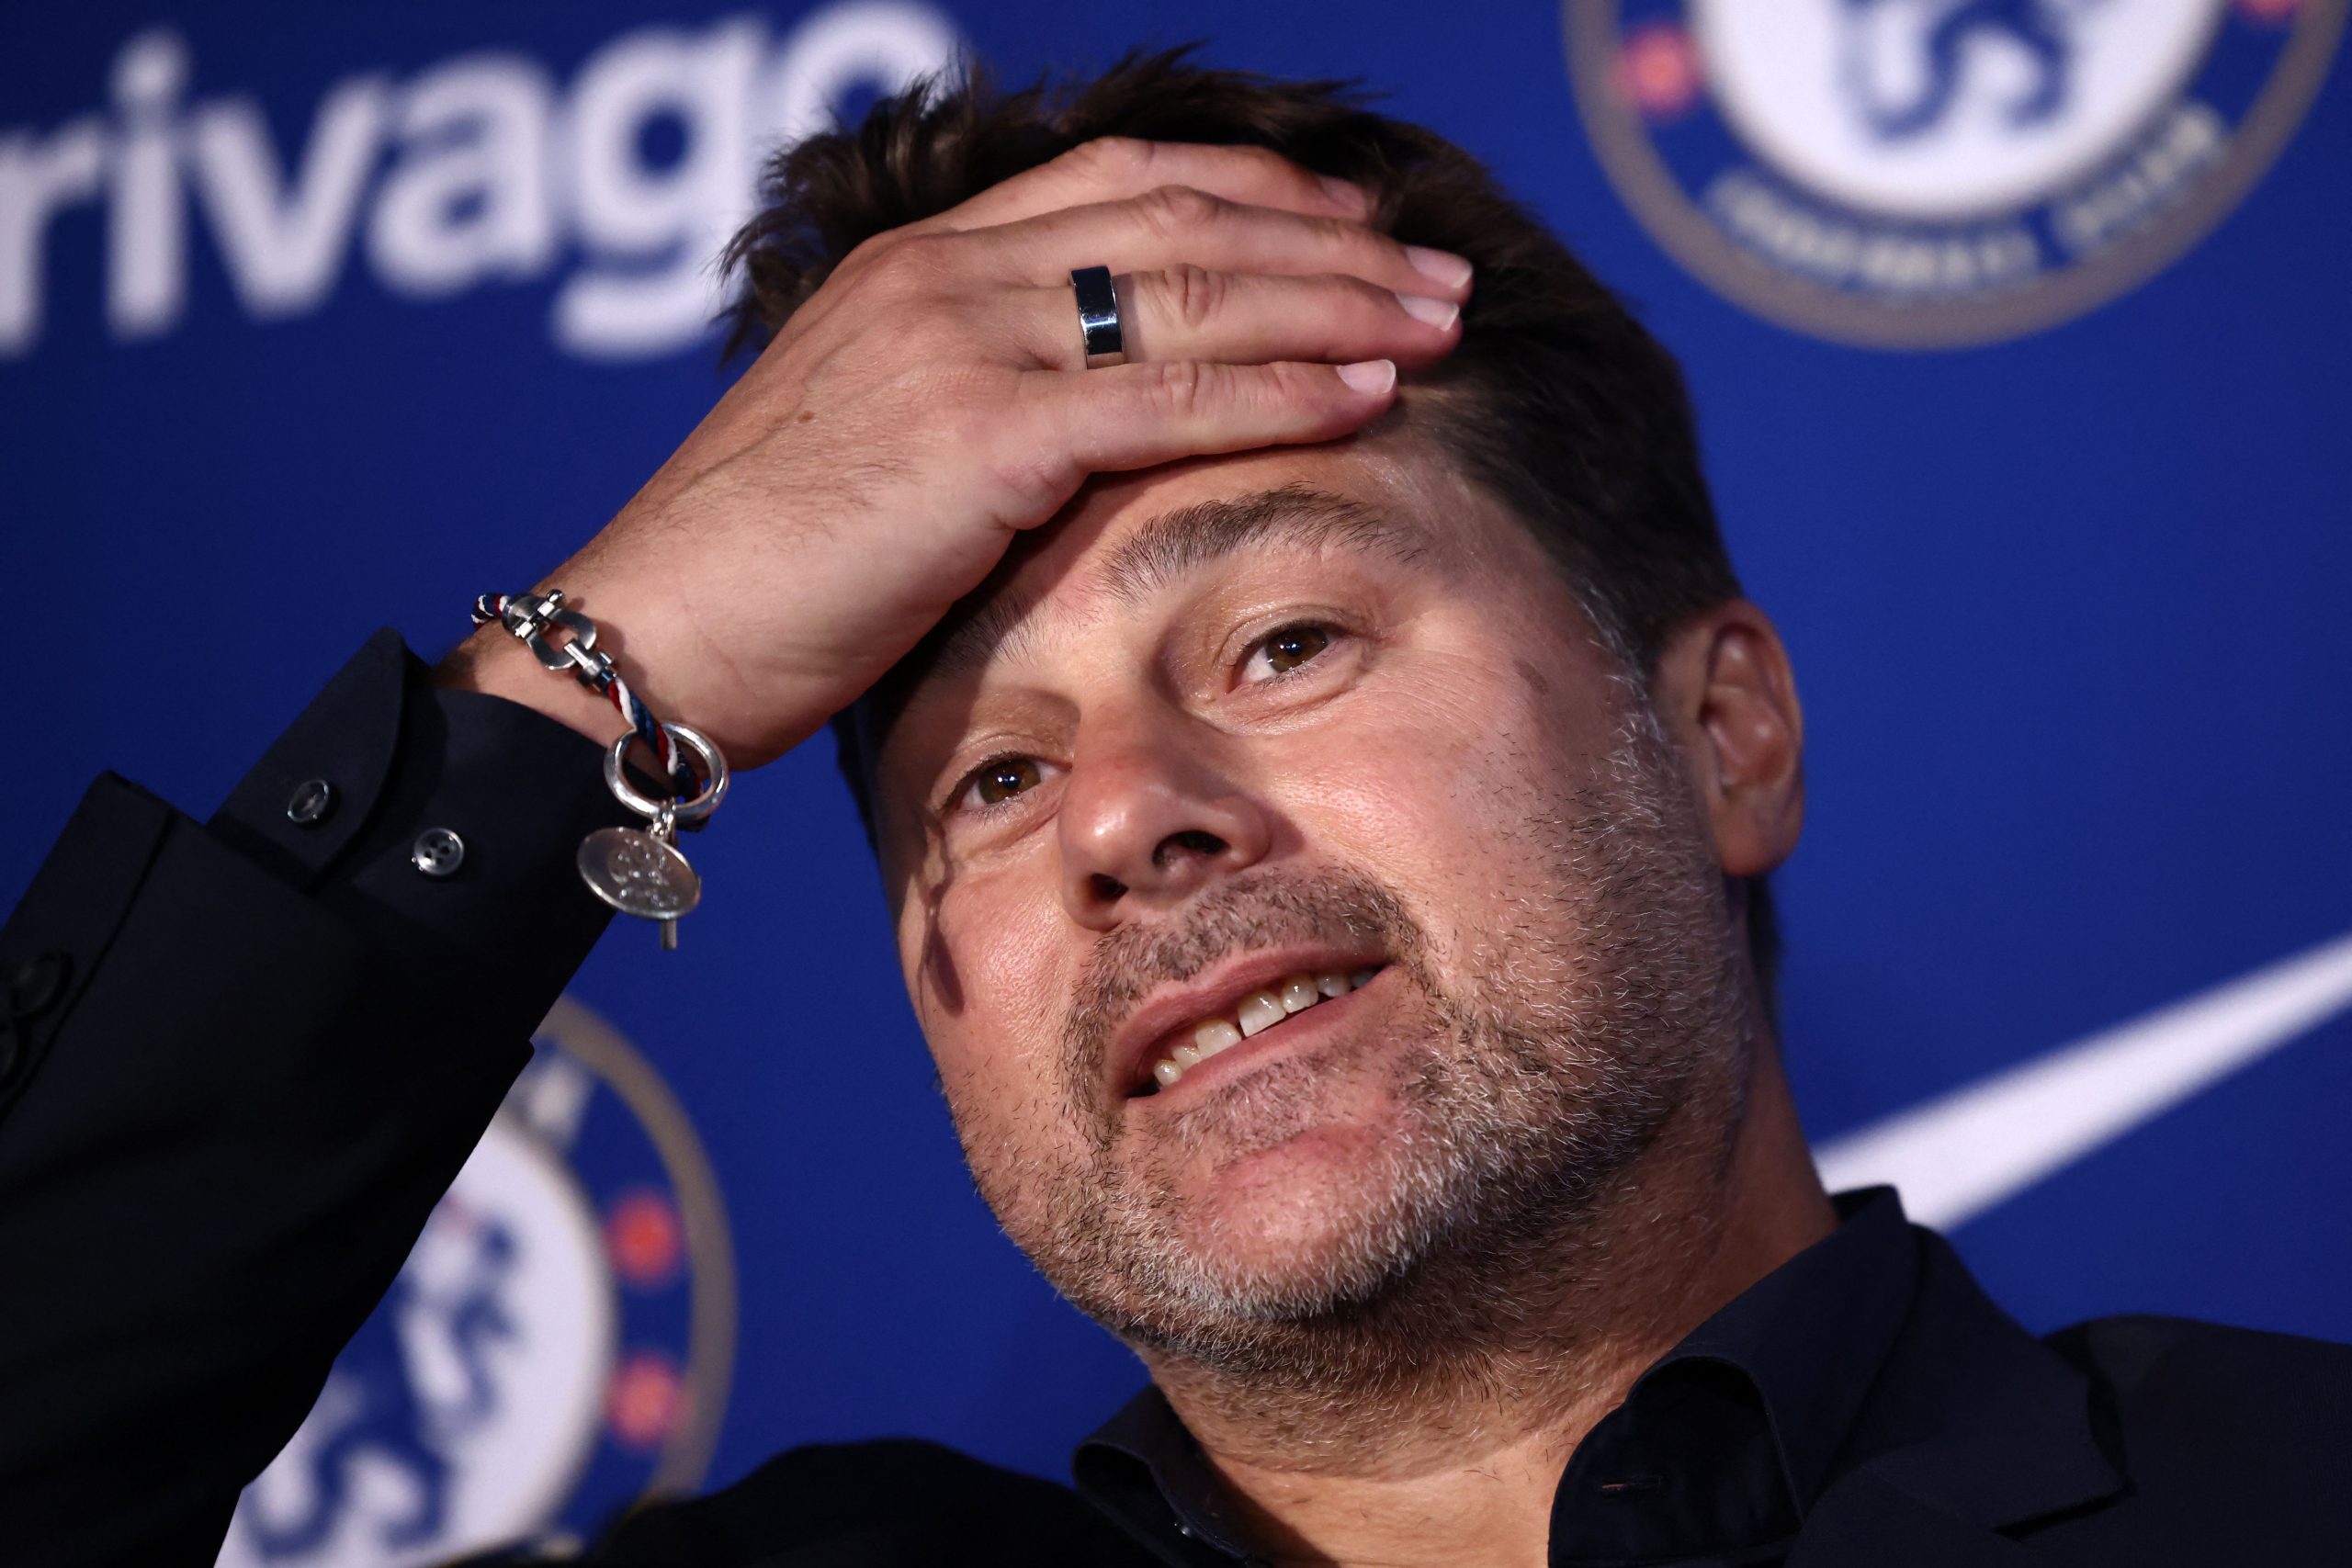 Chelsea linked manager Roberto De Zerbi announce his exit from Brighton & Hove Albion